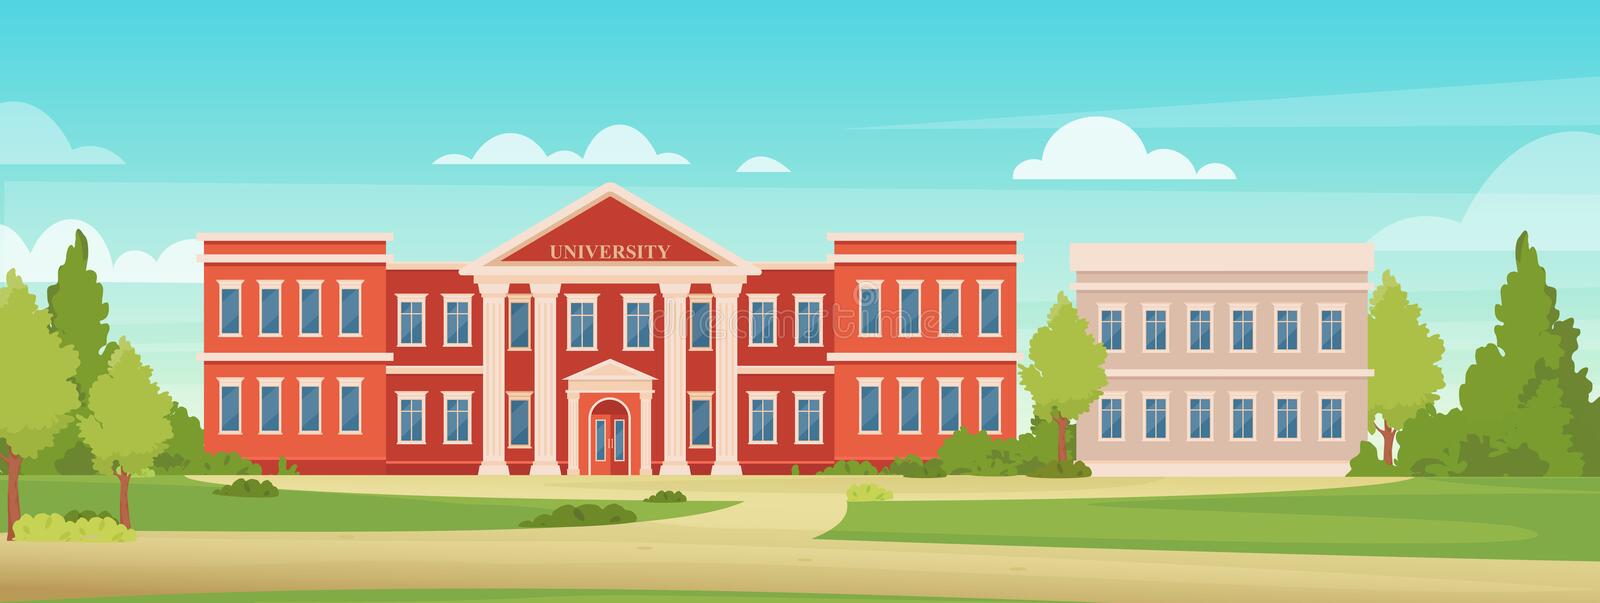 An illustrated traditional brick building labeled "university" surrounded by trees and under a blue sky.